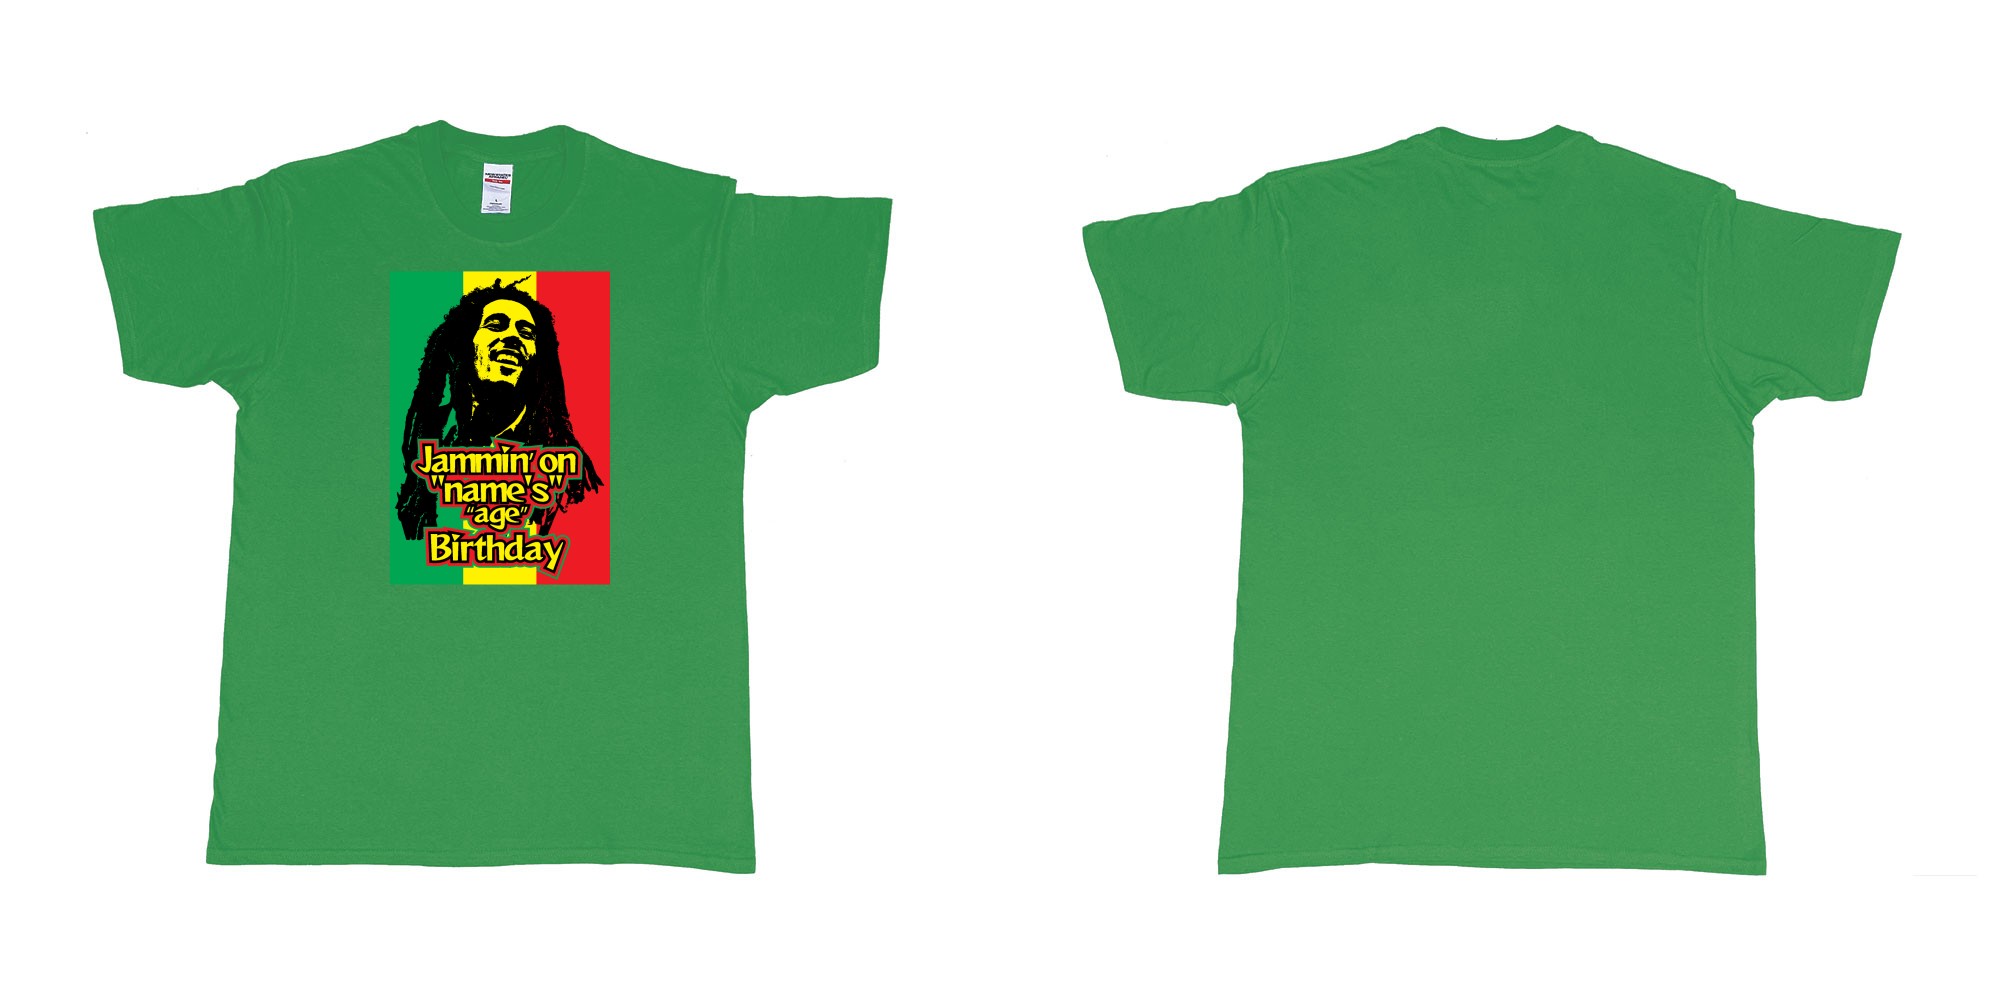 Custom tshirt design bob marley jammin on custom names birthday in fabric color irish-green choice your own text made in Bali by The Pirate Way